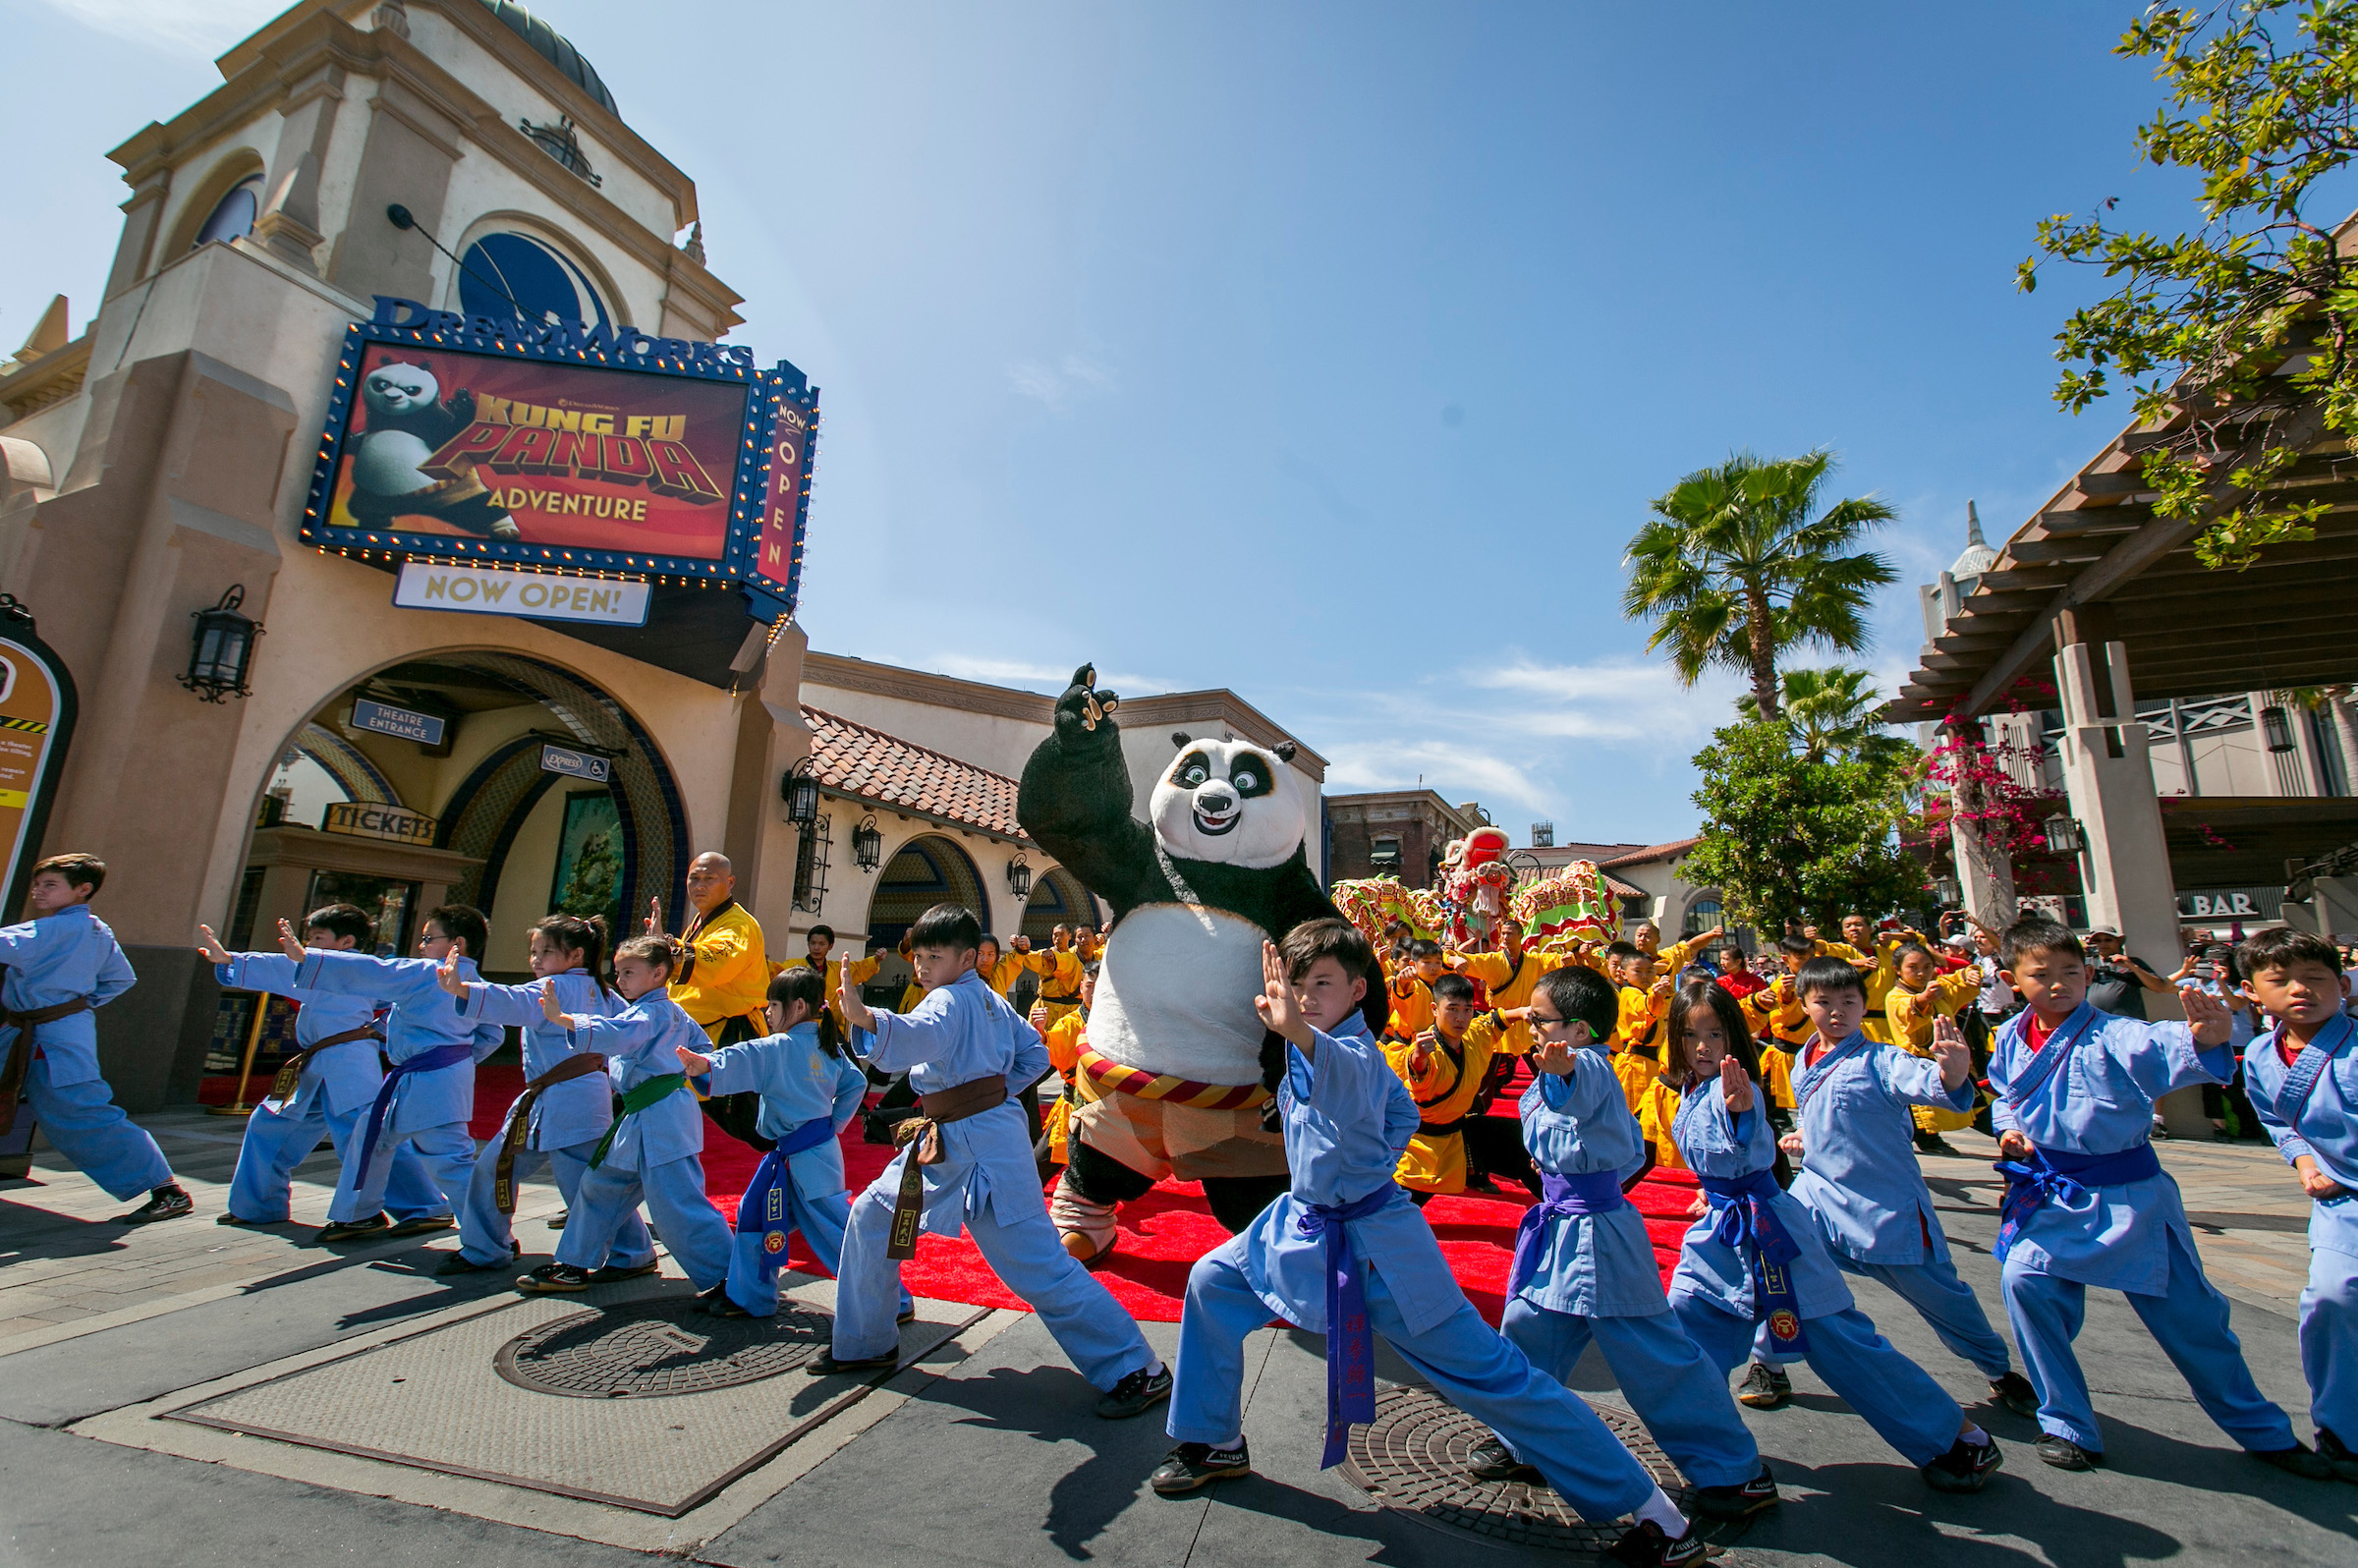 Featuring | Quest” Panda: Grand Theatre Inside Hollywood Universal Emperor\'s Opens at The Studios Fu Universal “Kung DreamWorks